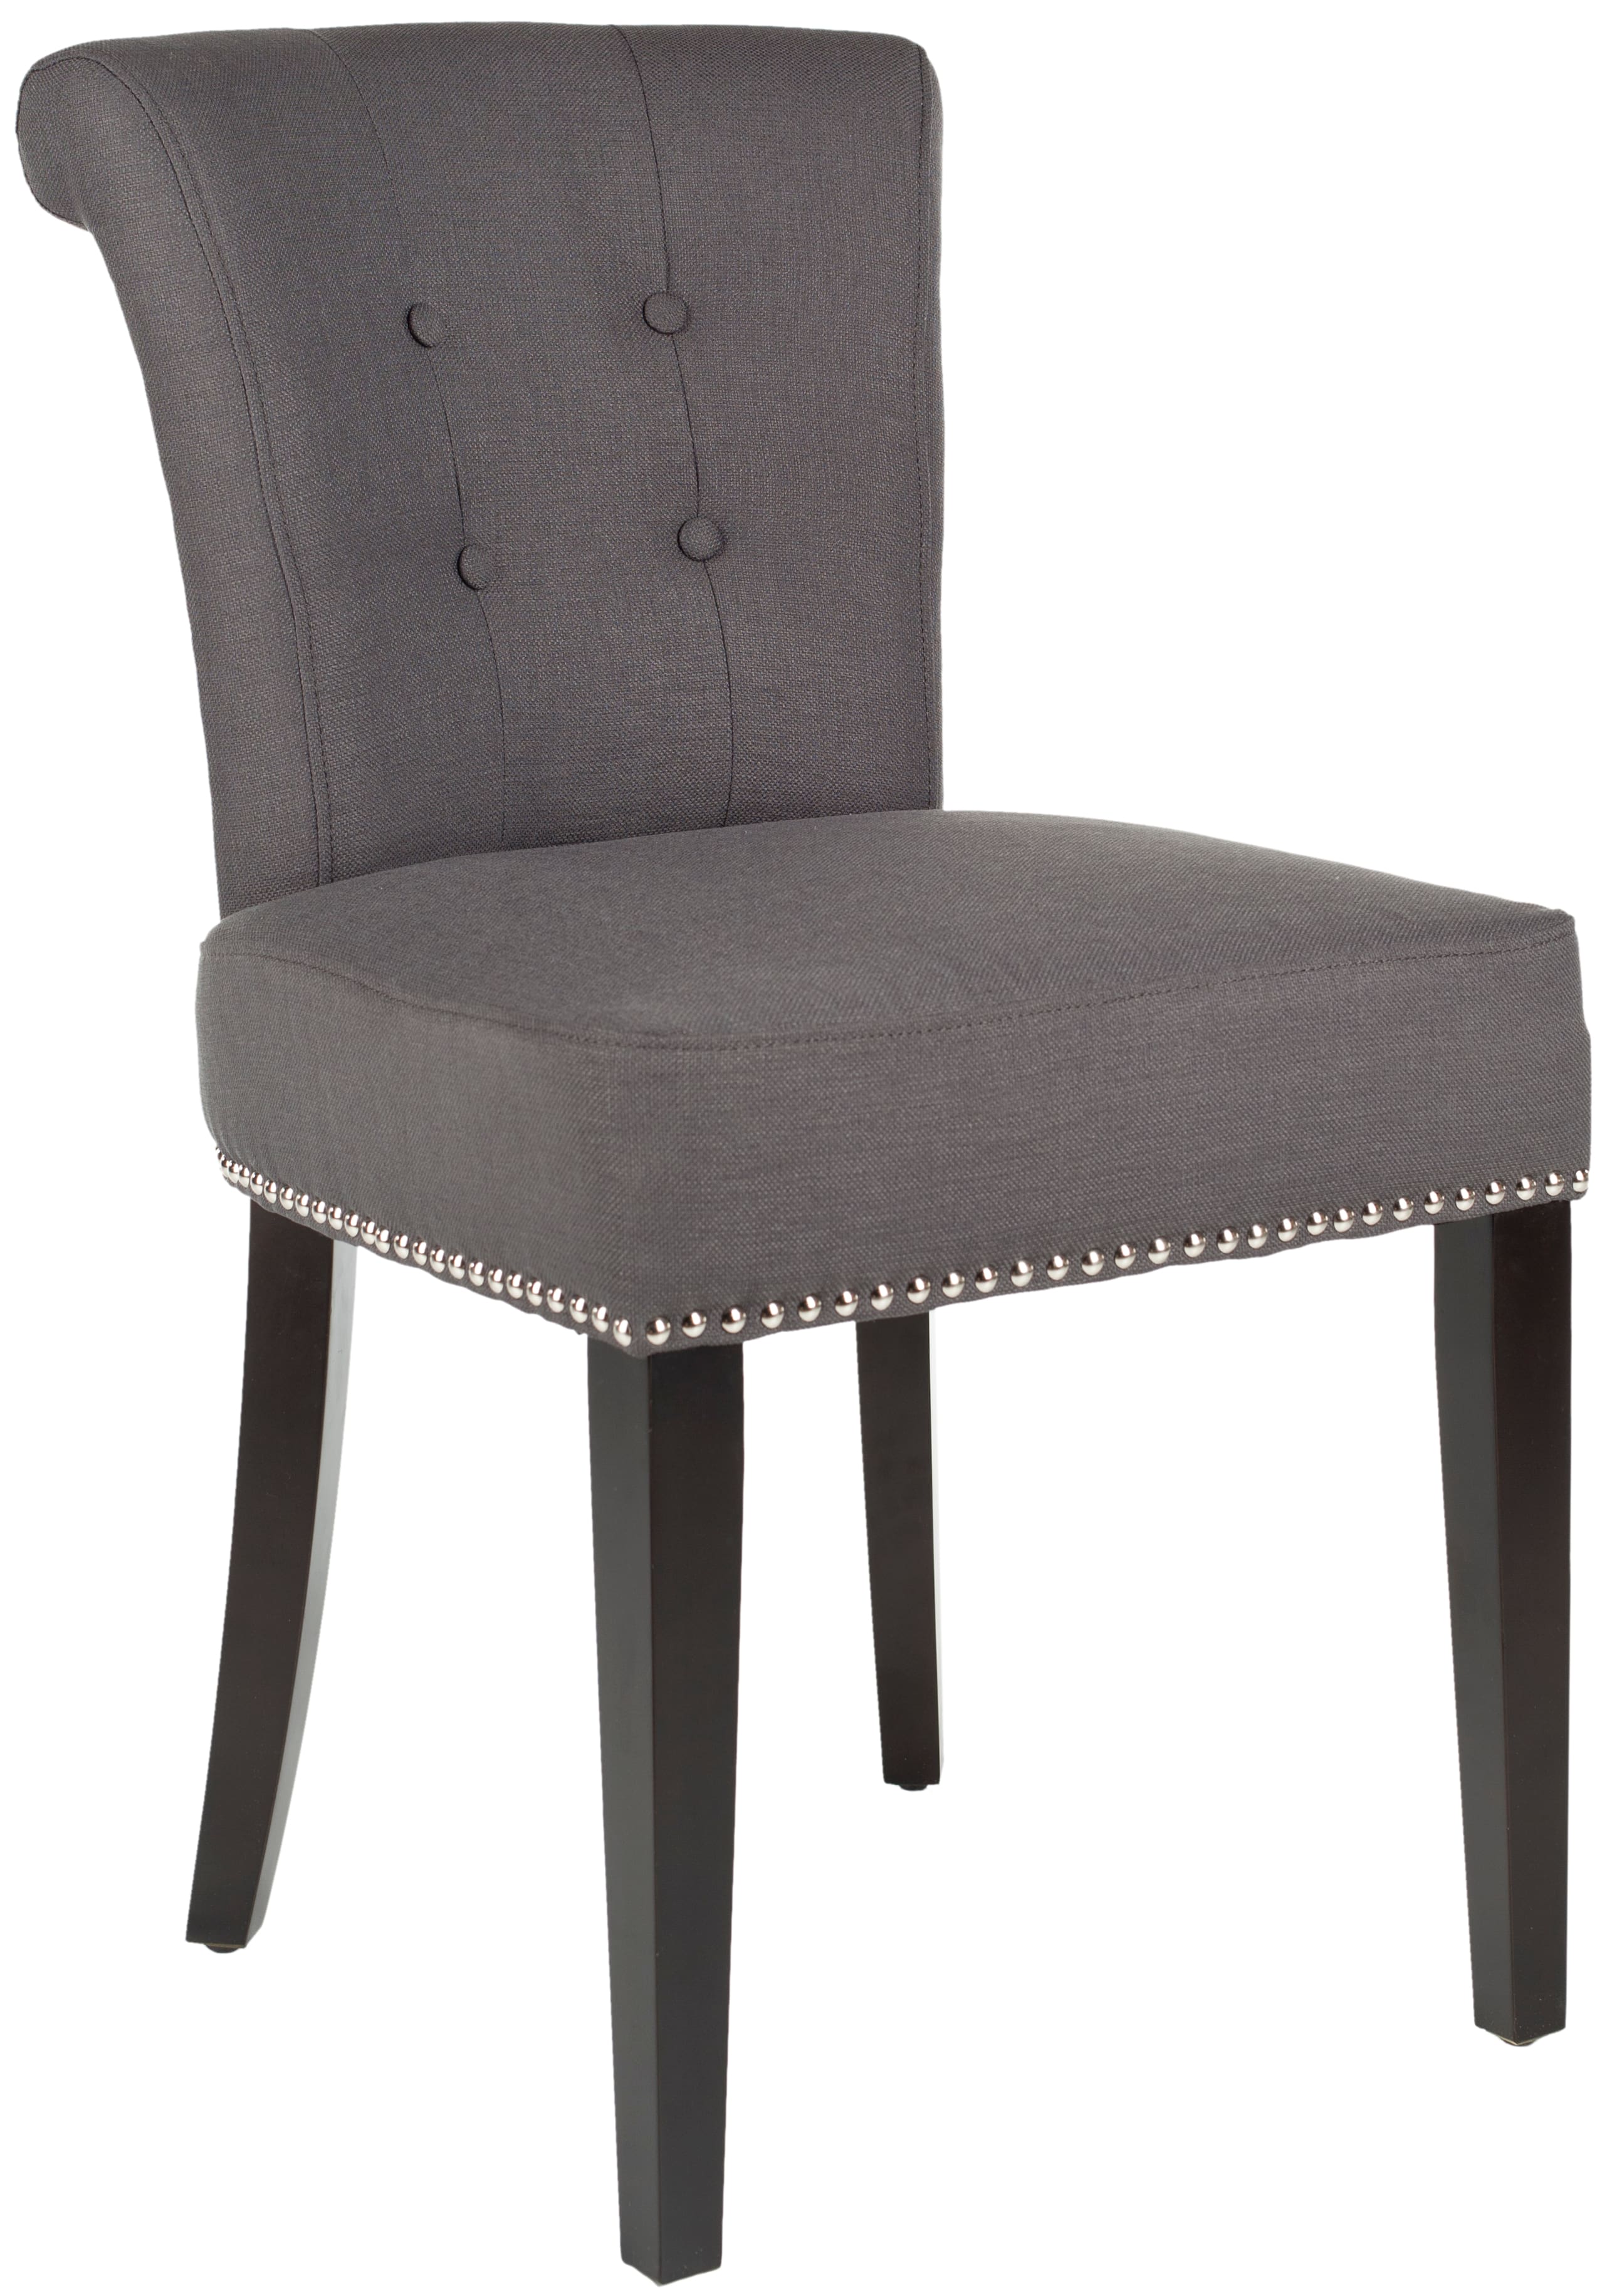 Sinclair Ring Chair Set of 2 in Gray